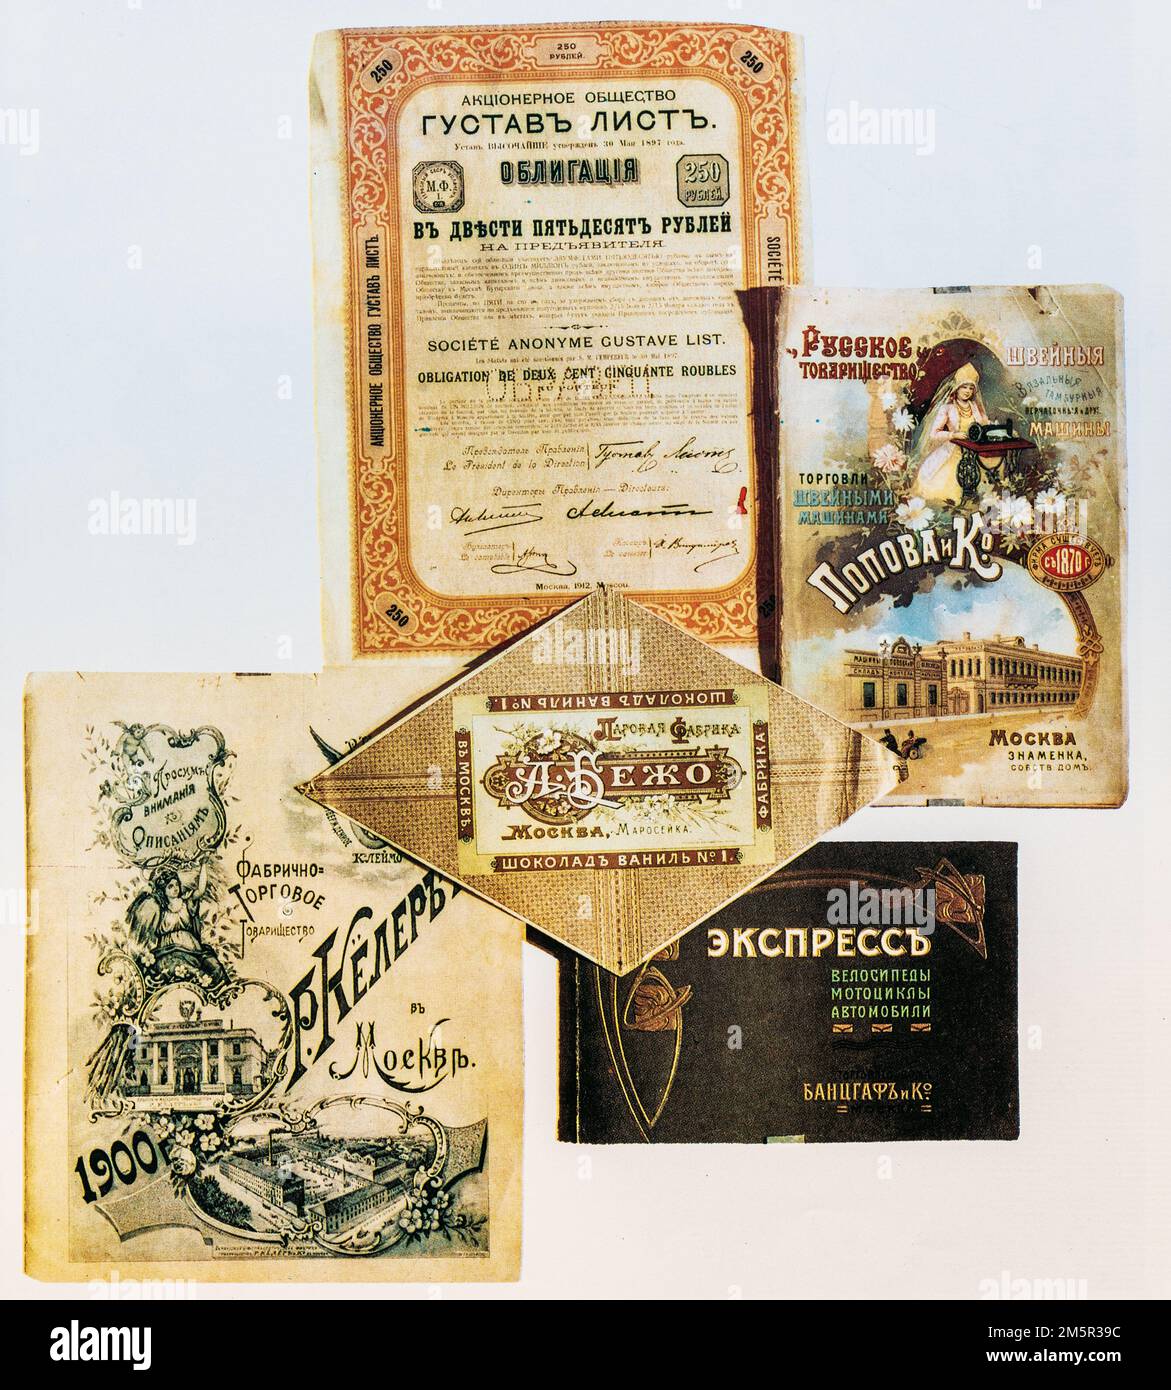 Joint-stock Company Bond and Trade Advertising of Moscow Enterprises. Pubblicità commerciale precedente. Foto Stock